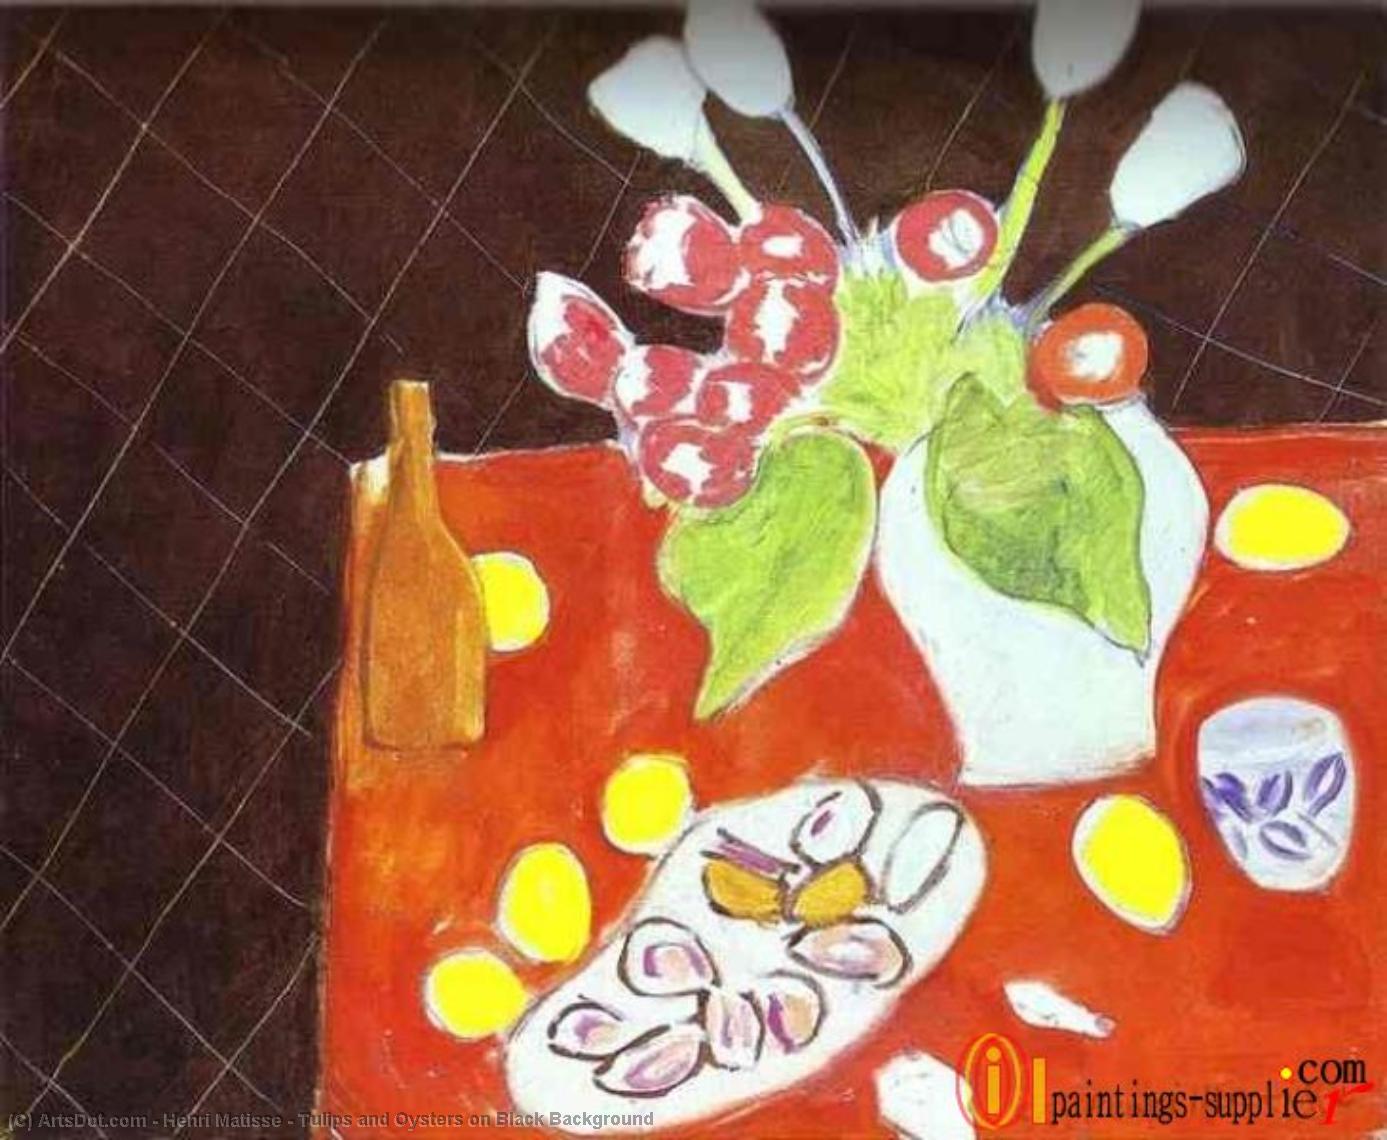 WikiOO.org - 백과 사전 - 회화, 삽화 Henri Matisse - Tulips and Oysters on Black Background